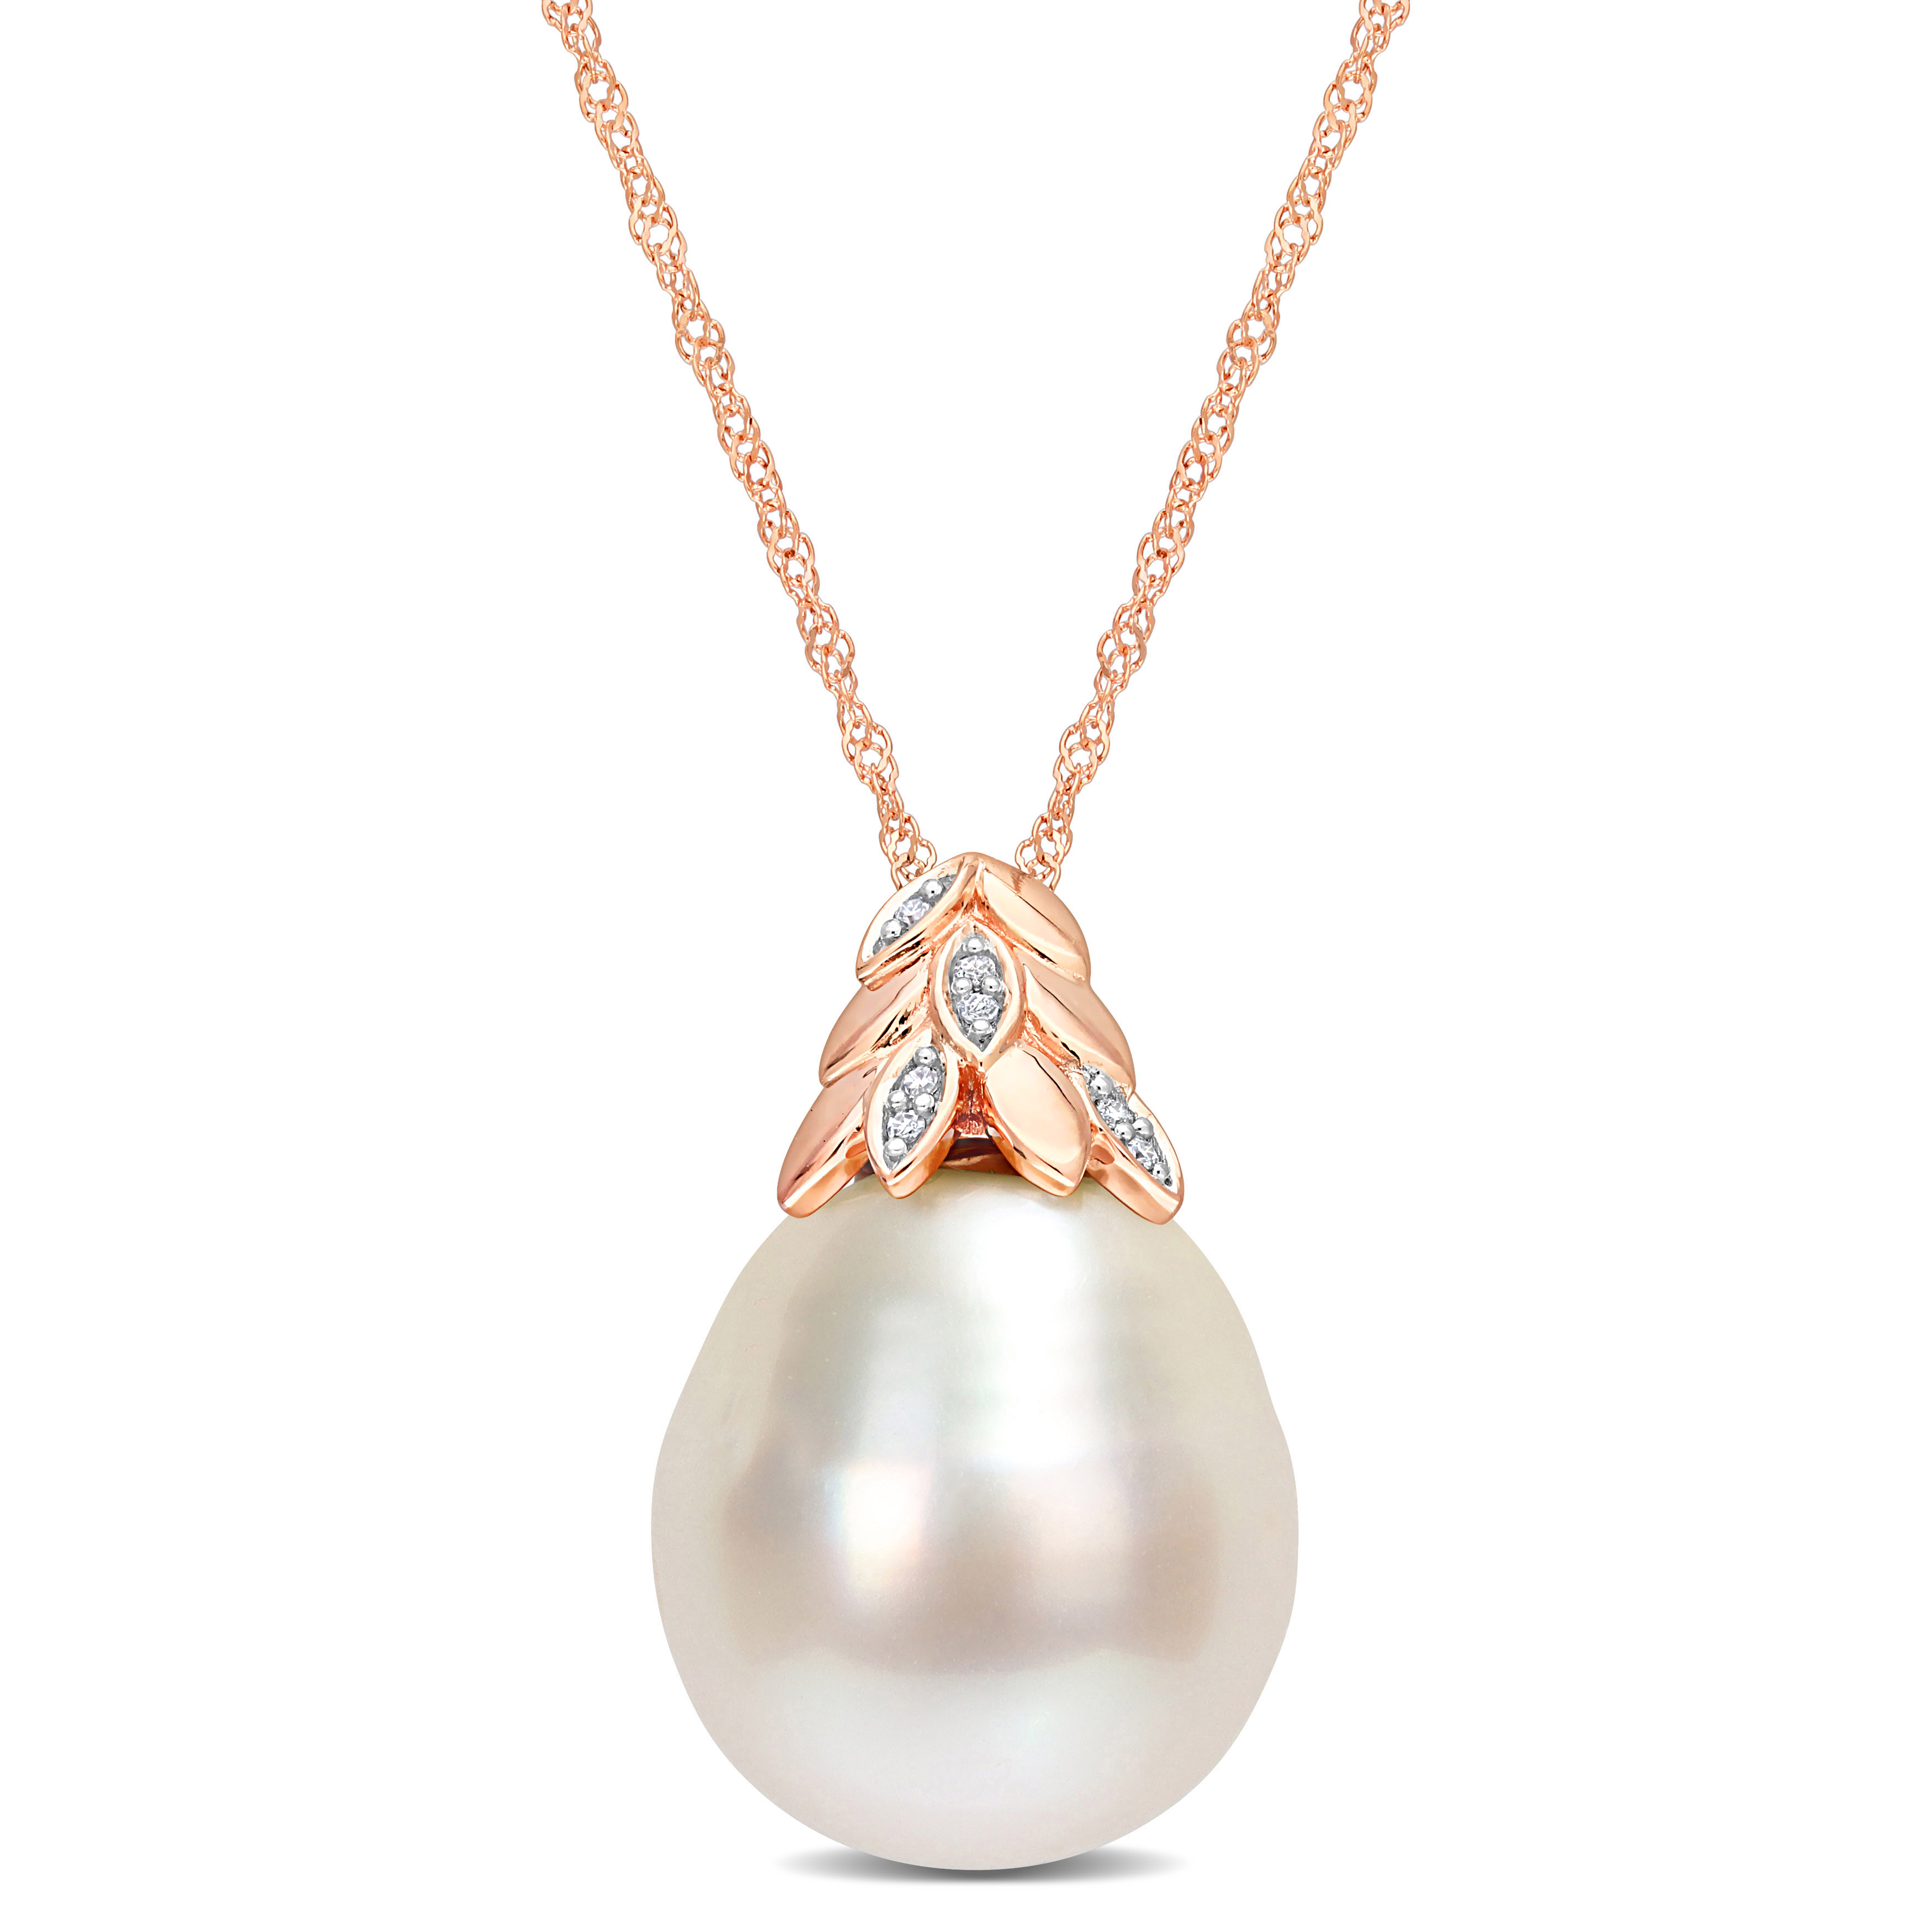 14-14.5 MM South Sea Cultured Pearl and Diamond Accent Pendant with Chain in 14k Rose Gold